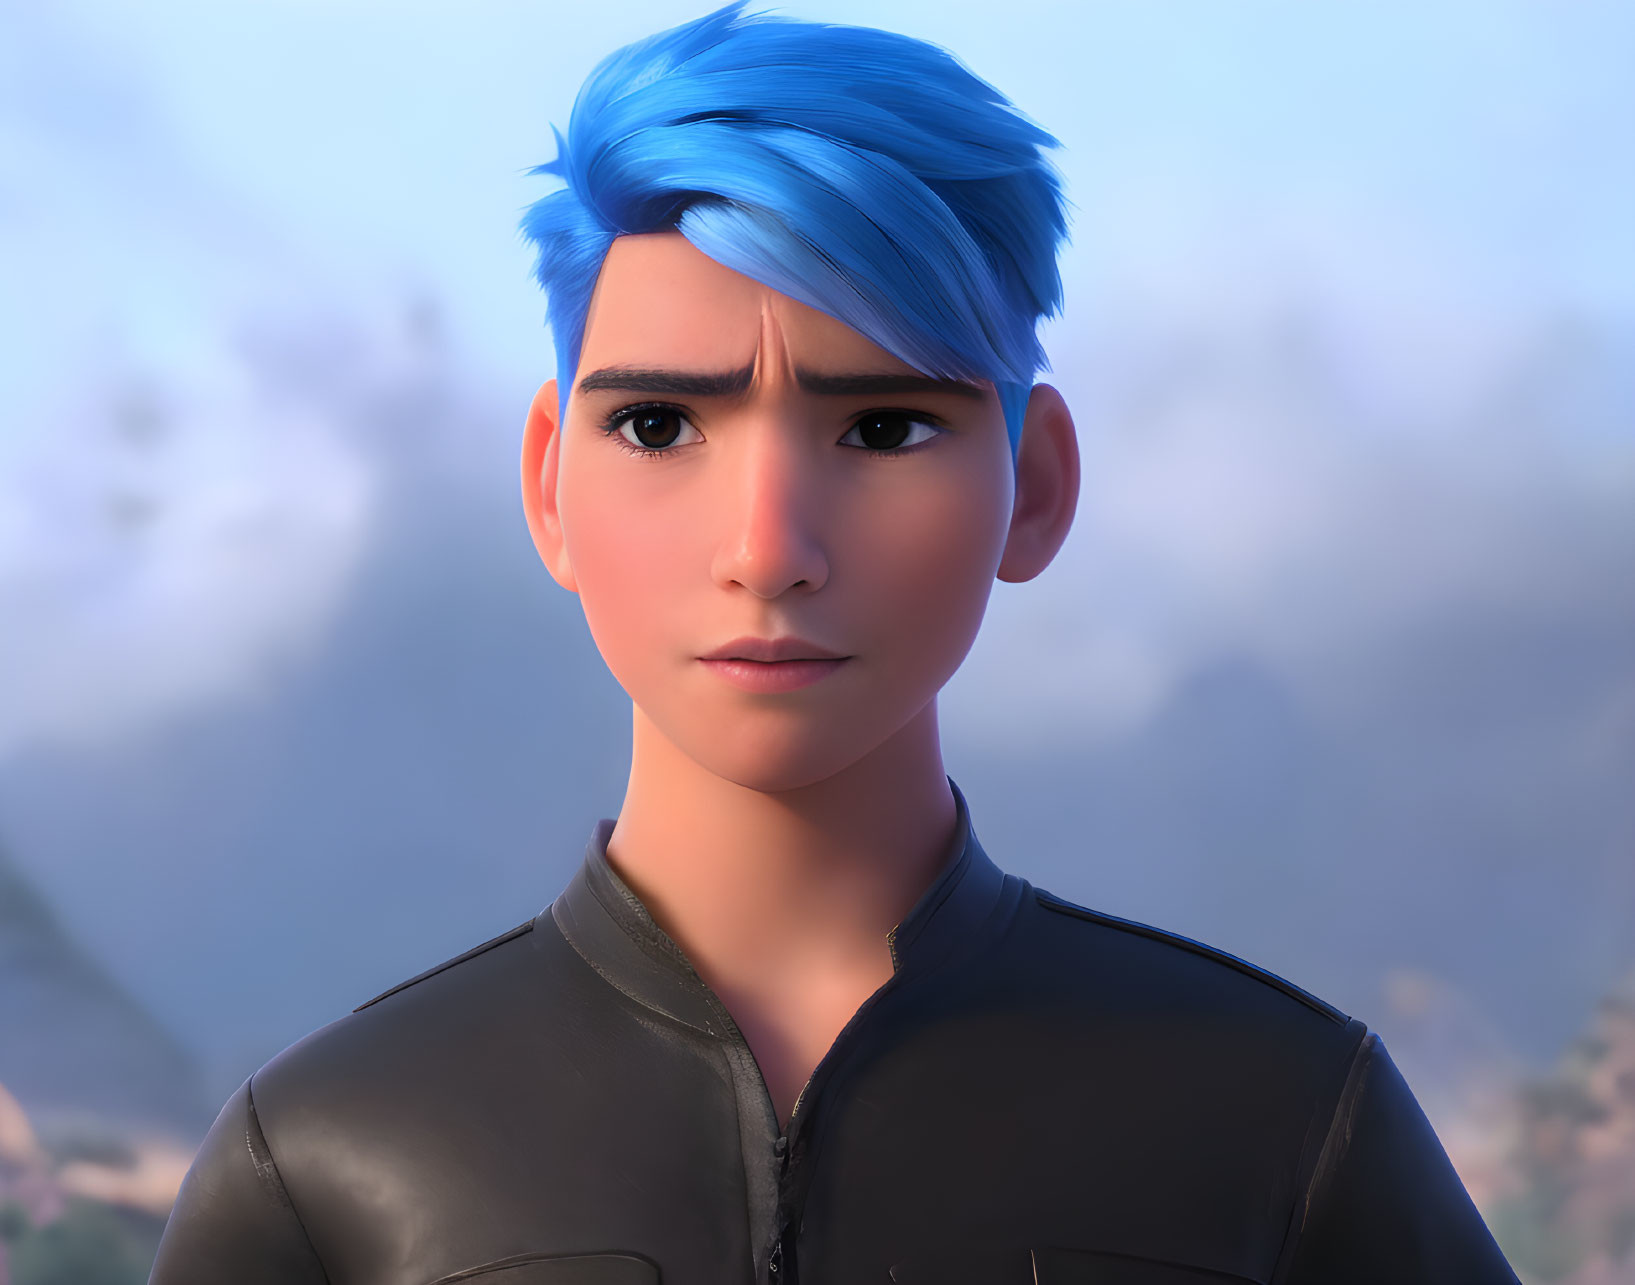 Young character with blue hair in serious expression against blurry natural backdrop